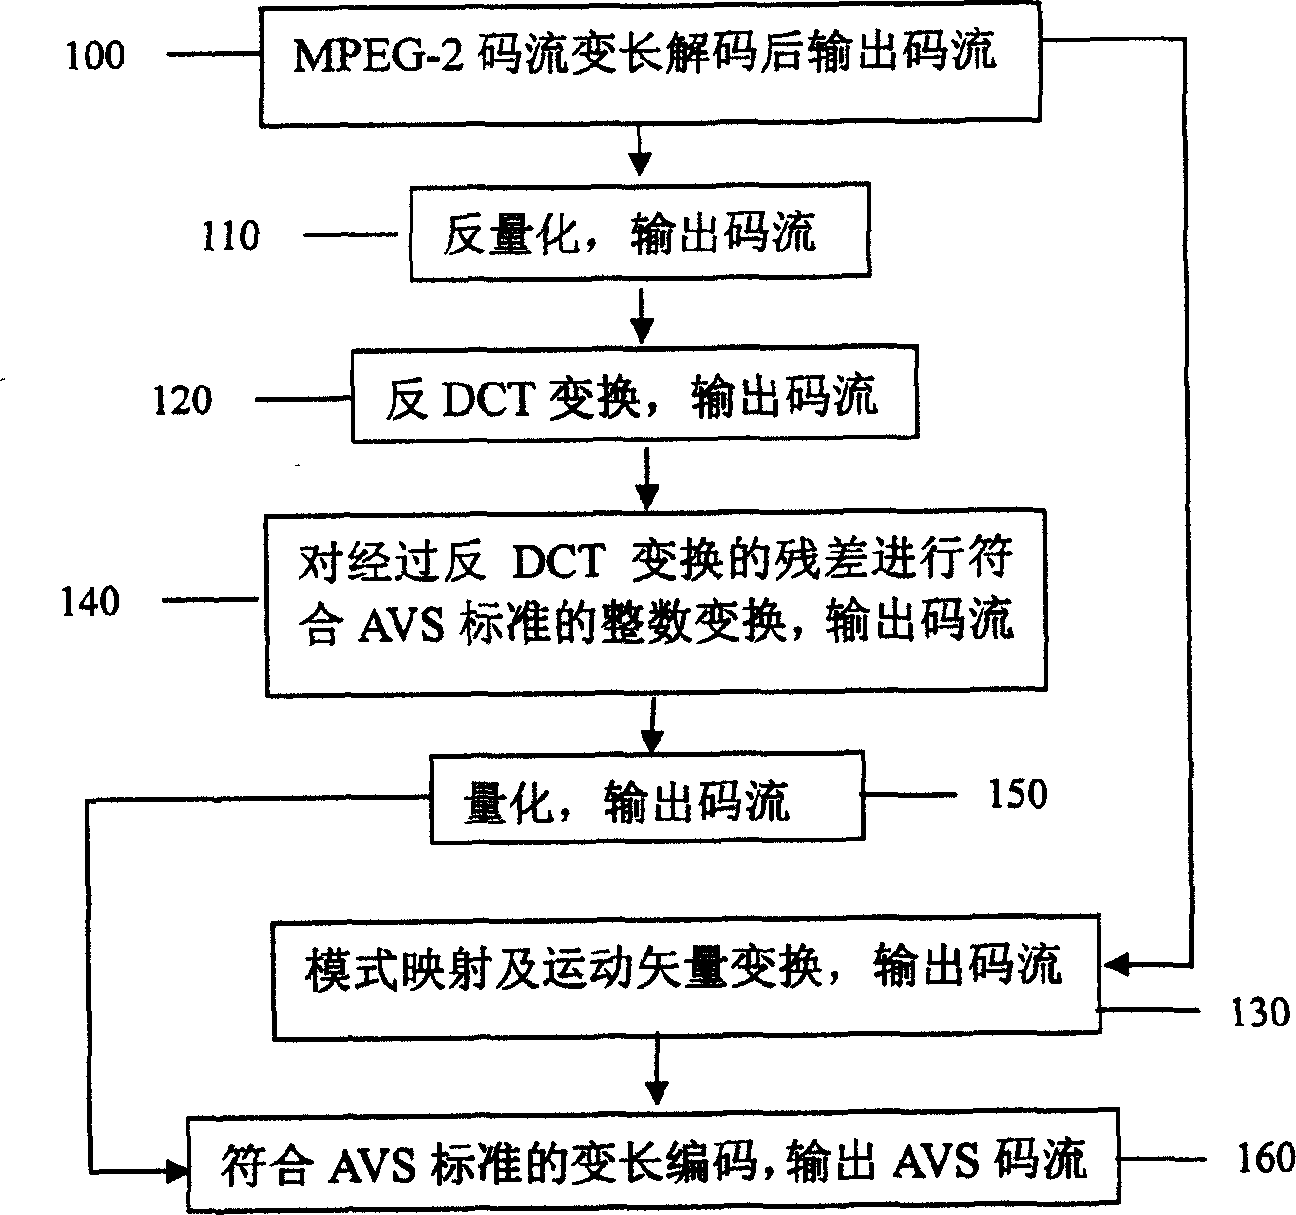 A MPEG-2 to AVS video code stream conversion method and apparatus